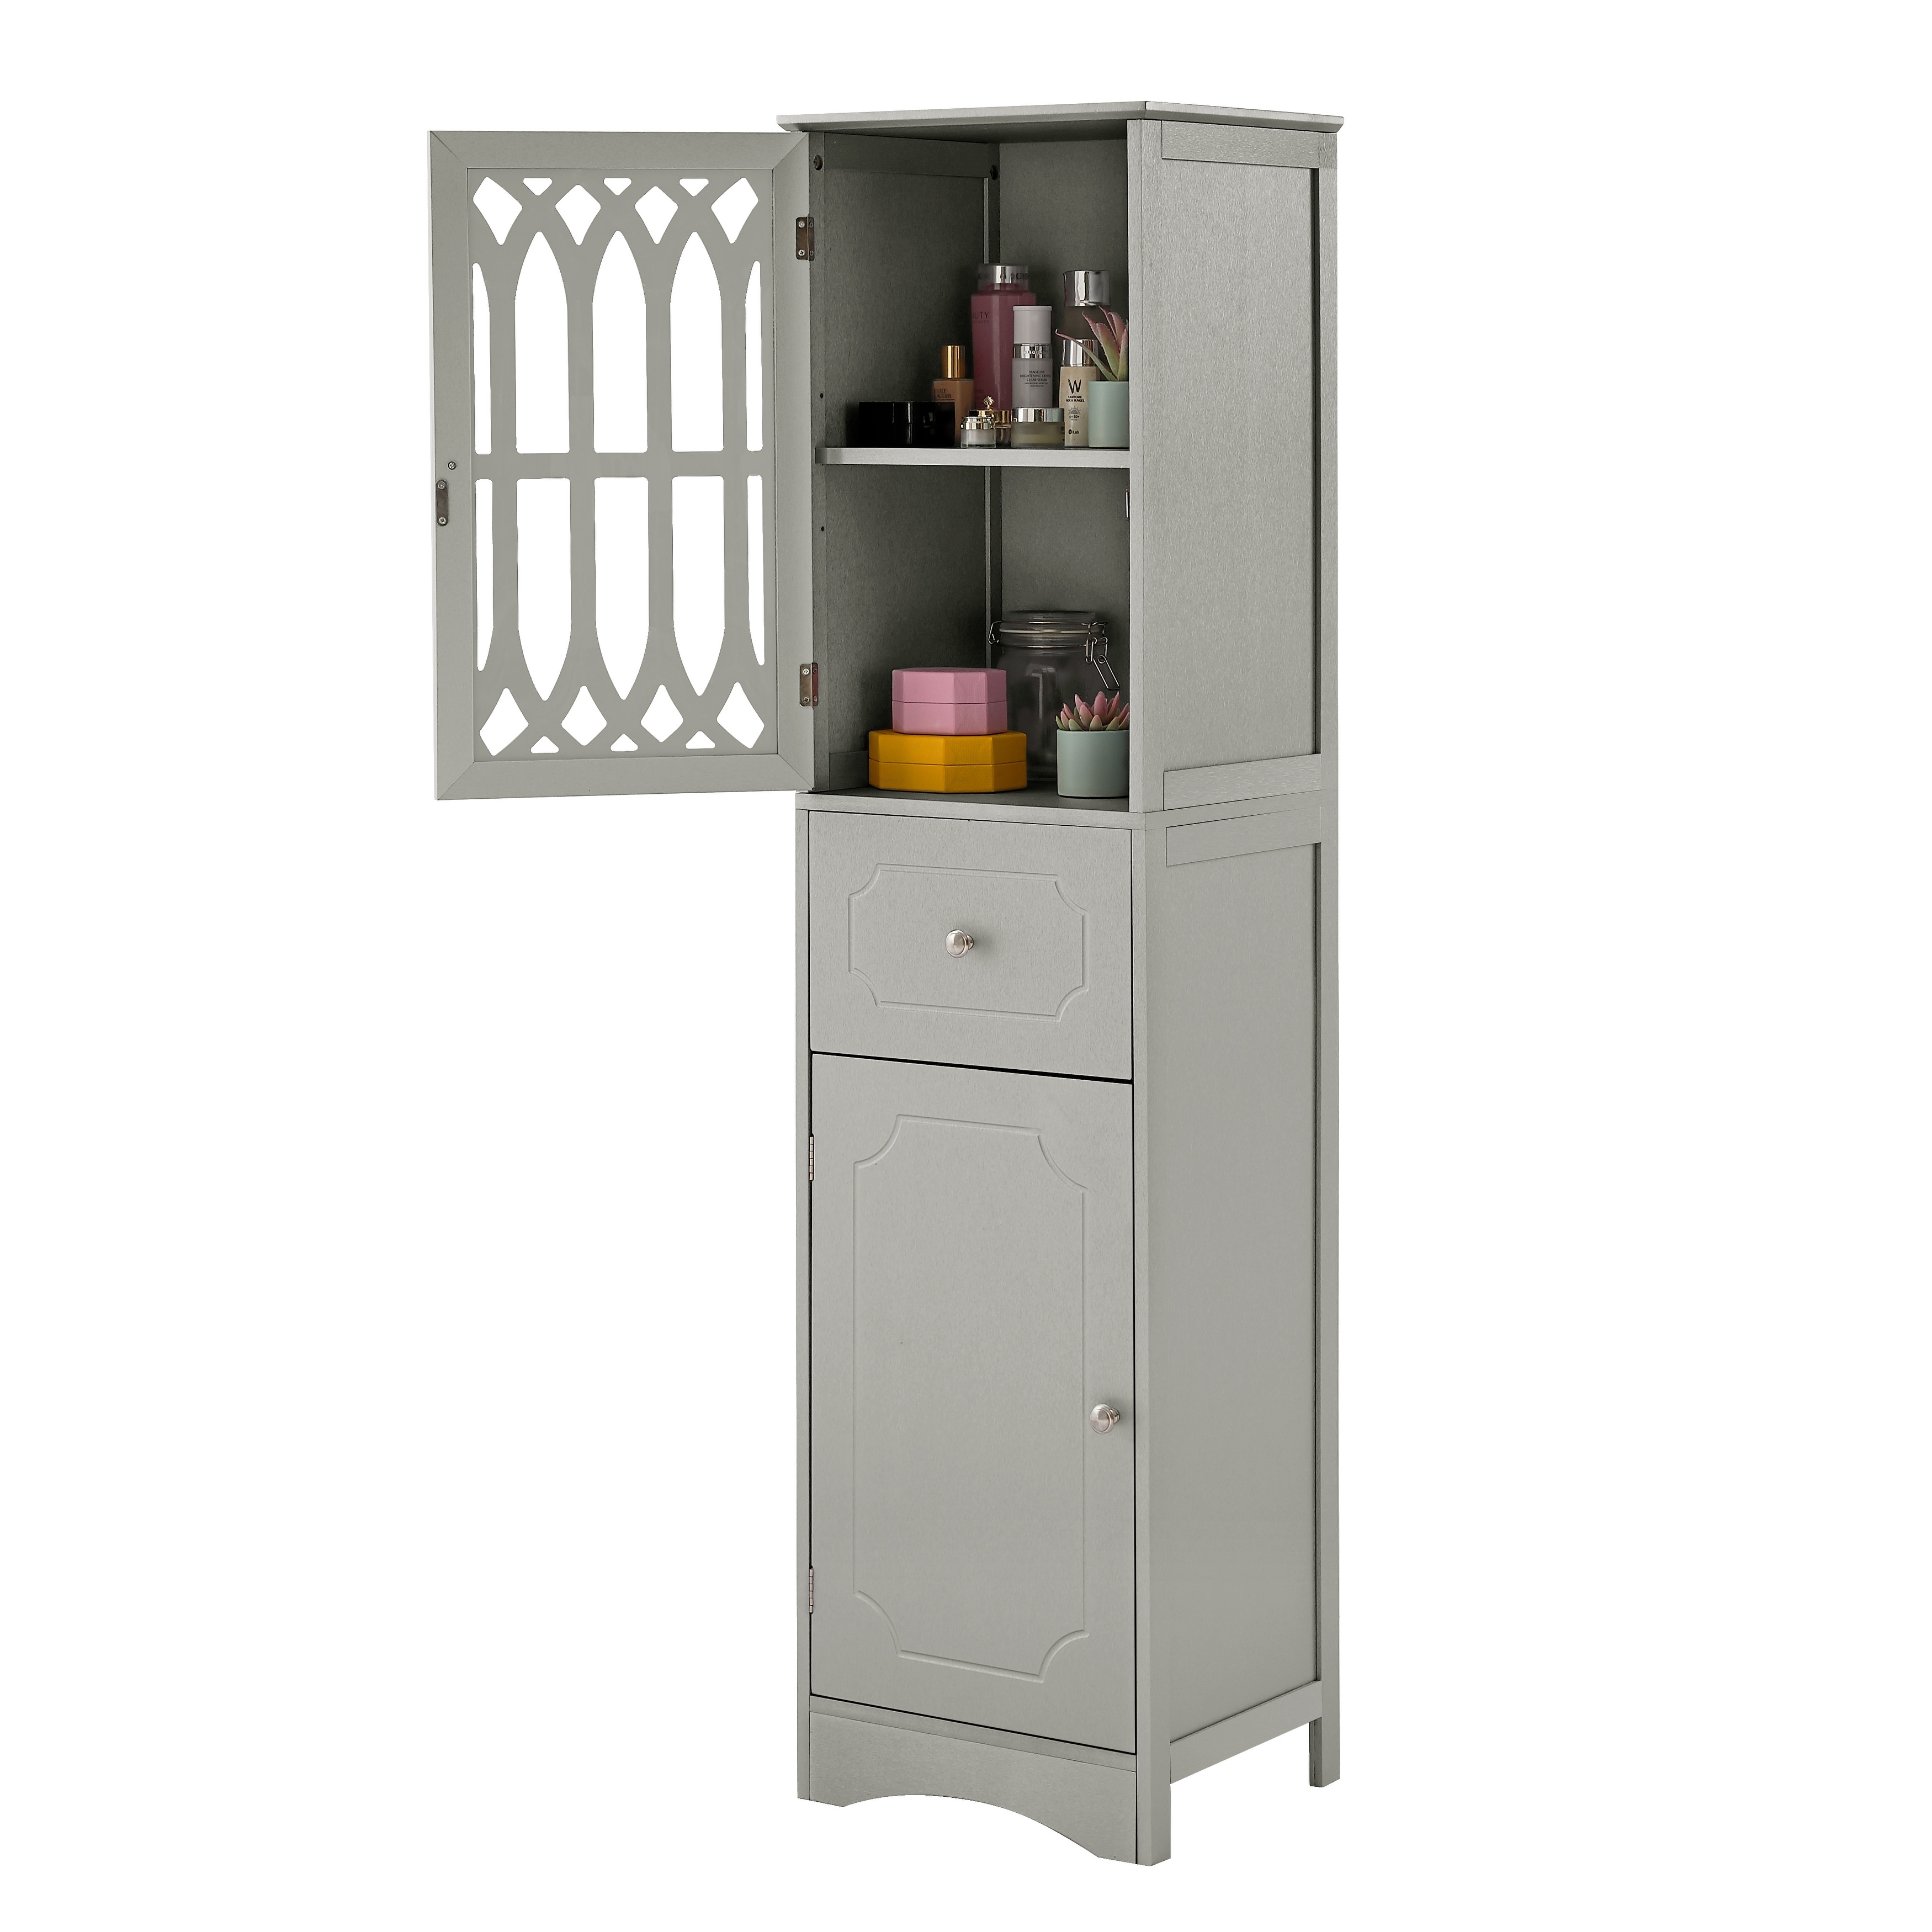 https://ak1.ostkcdn.com/images/products/is/images/direct/8474dde3ebcd9903b6814d4da81101fac726355c/Tall-Bathroom-Cabinet%2C-Freestanding-Storage-Cabinet-with-Drawer-and-2-Doors%2C-Mid-Century-Modern-Cabinet-with-Adjustable-Shelf.jpg